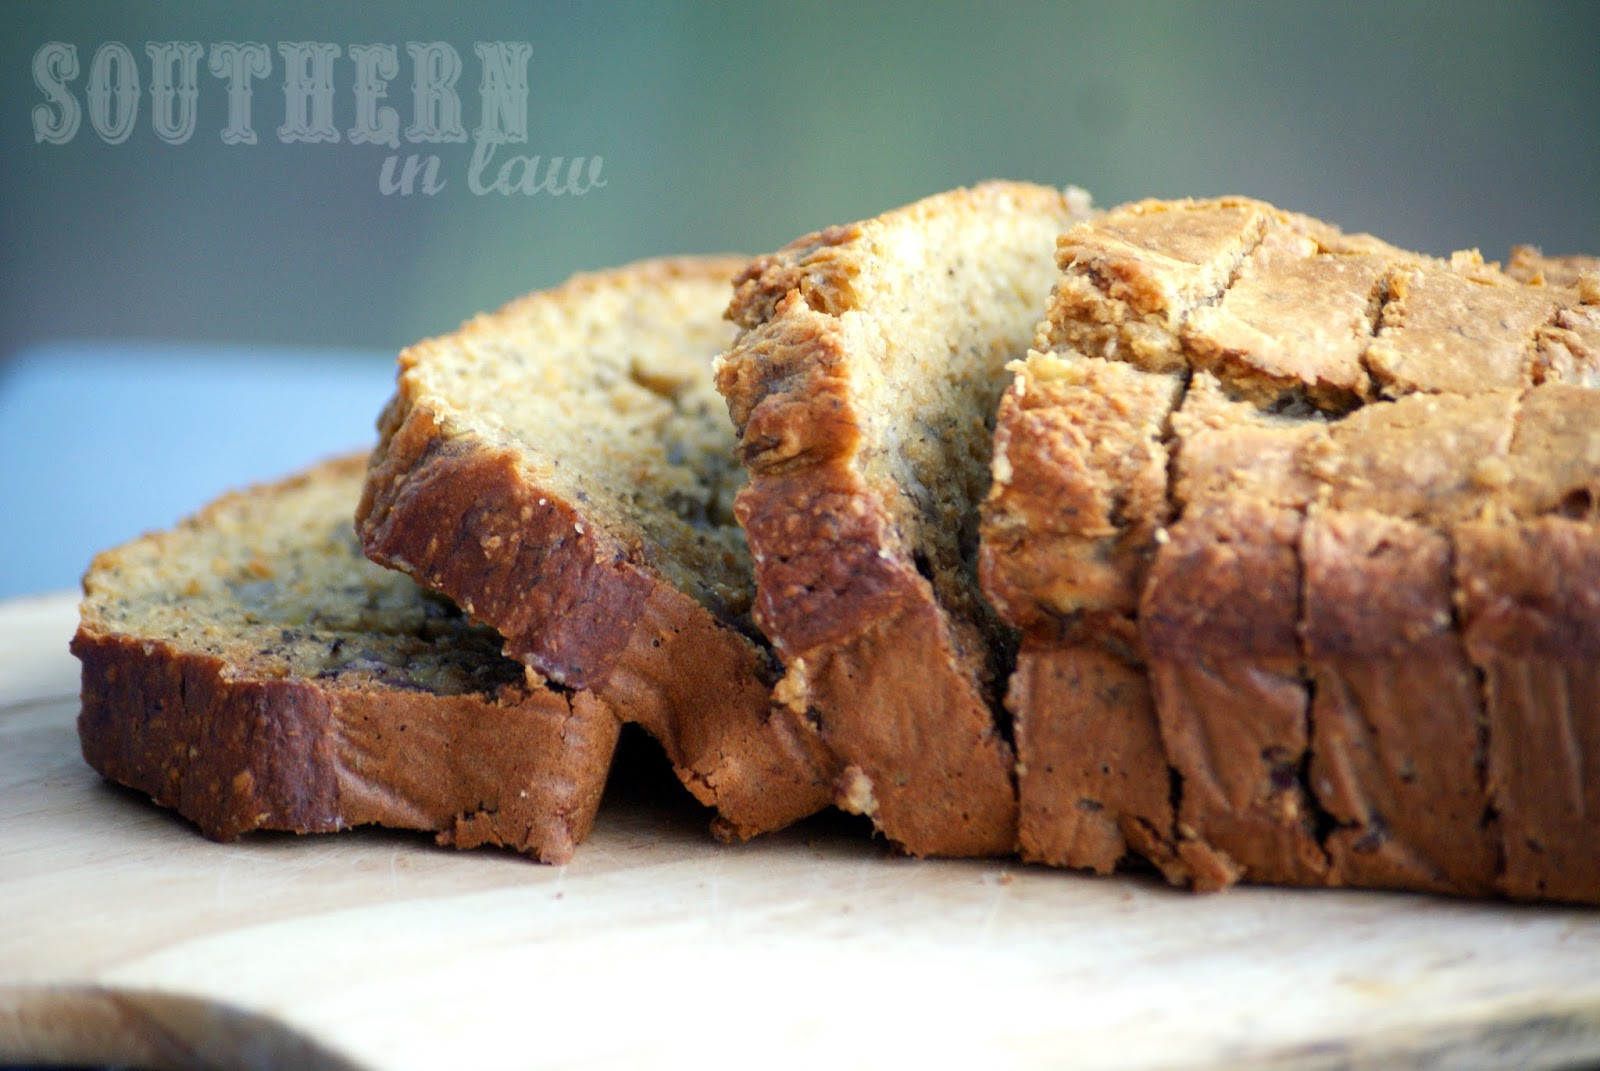 Healthy Low Calorie Bread Inspirational southern In Law Recipe Healthy Banana Bread